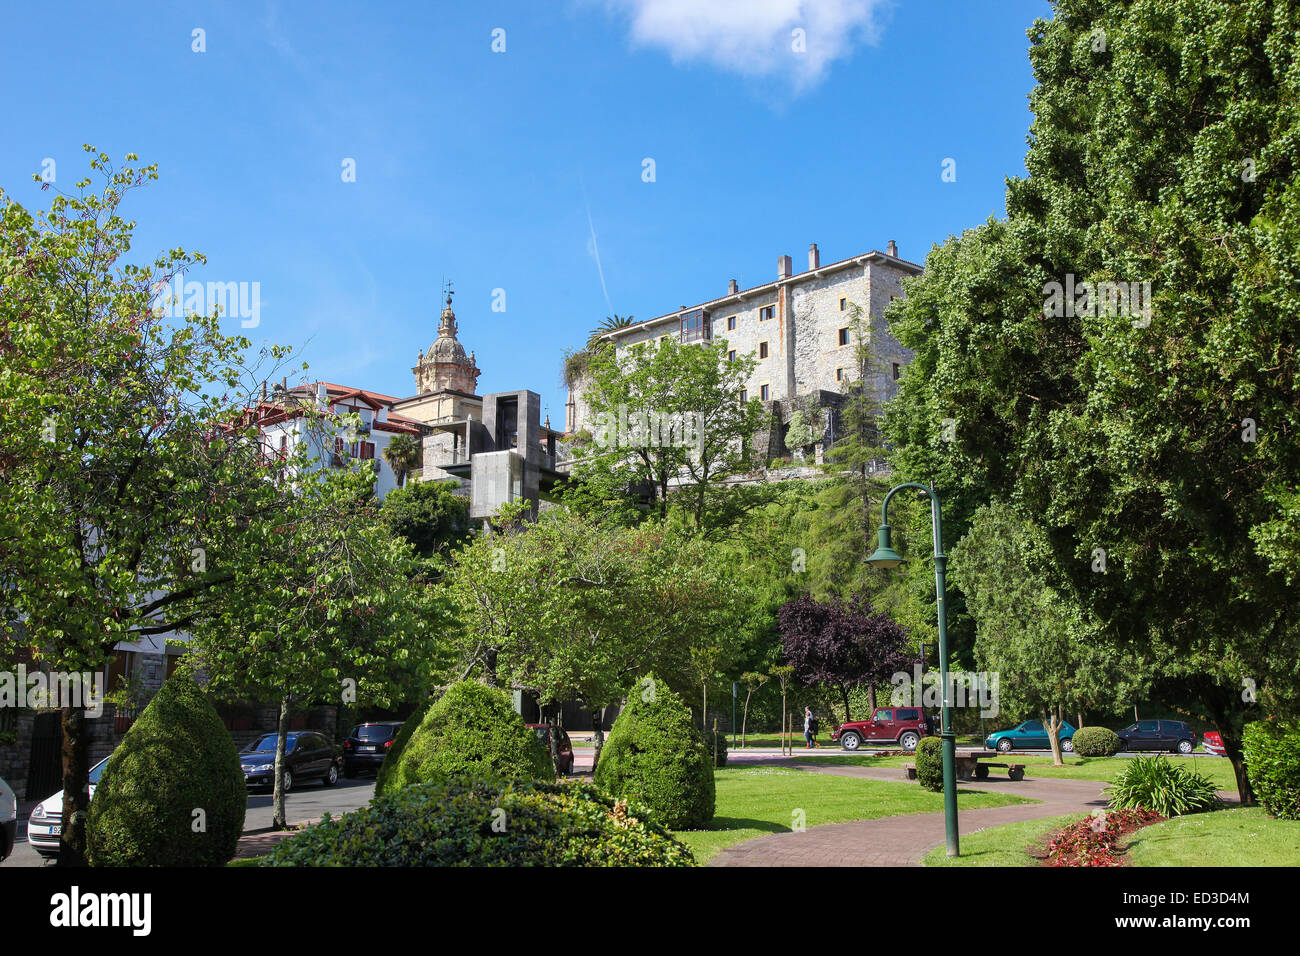 HONDARRIBIA, SPAIN - MAY 27, 2014: The old center of Hondarribia, a town in Gipuzkoa, Basque Country, Spain, Stock Photo